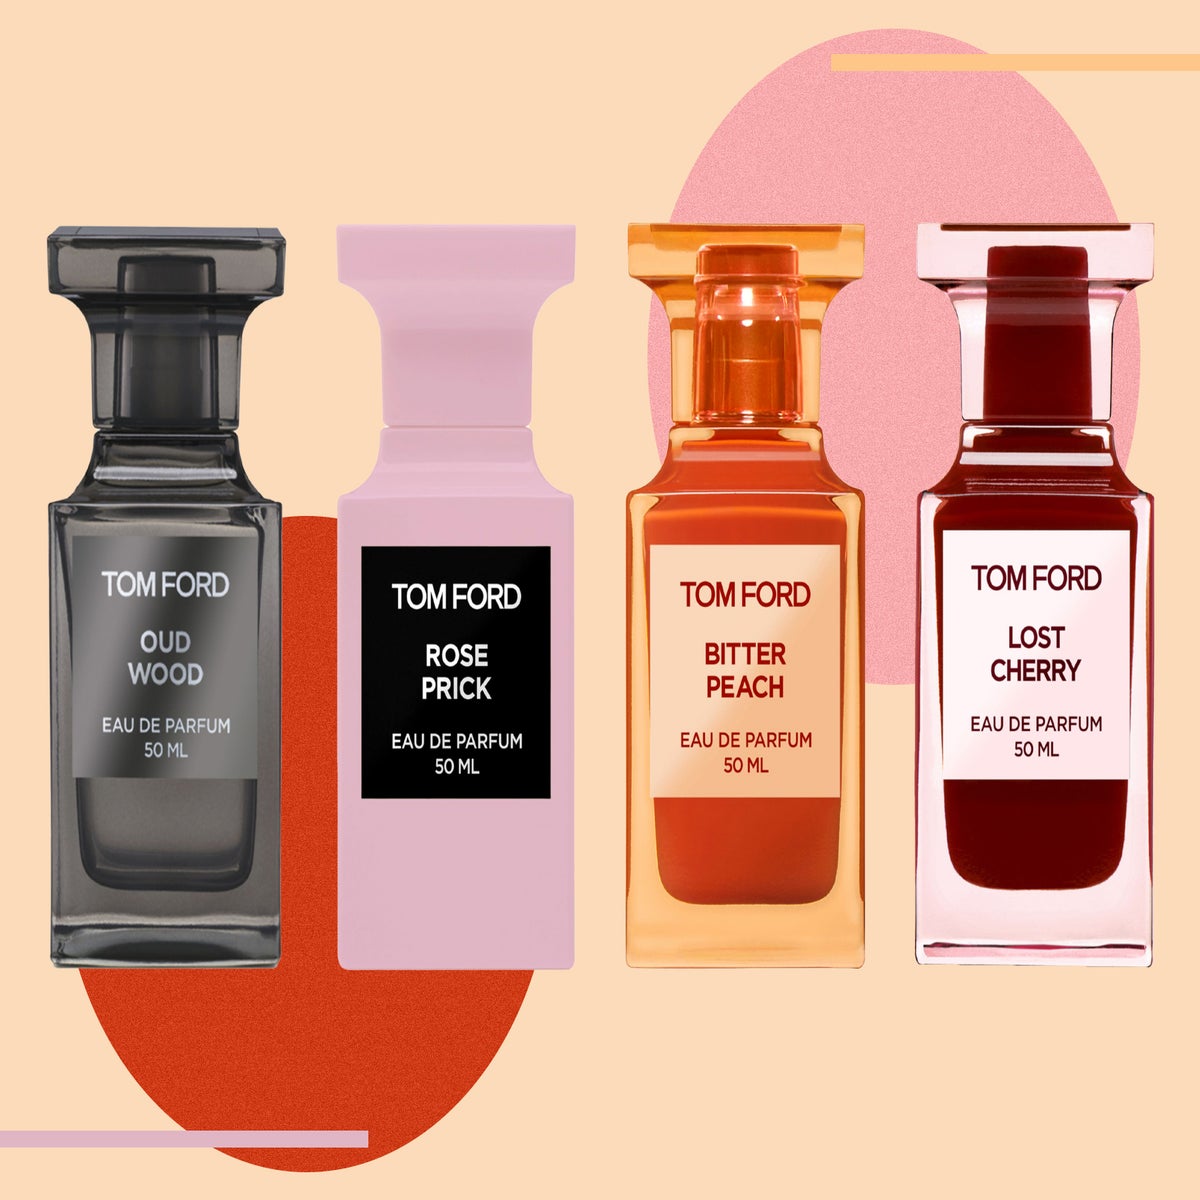 Which Tom Ford Perfume Is The Best?